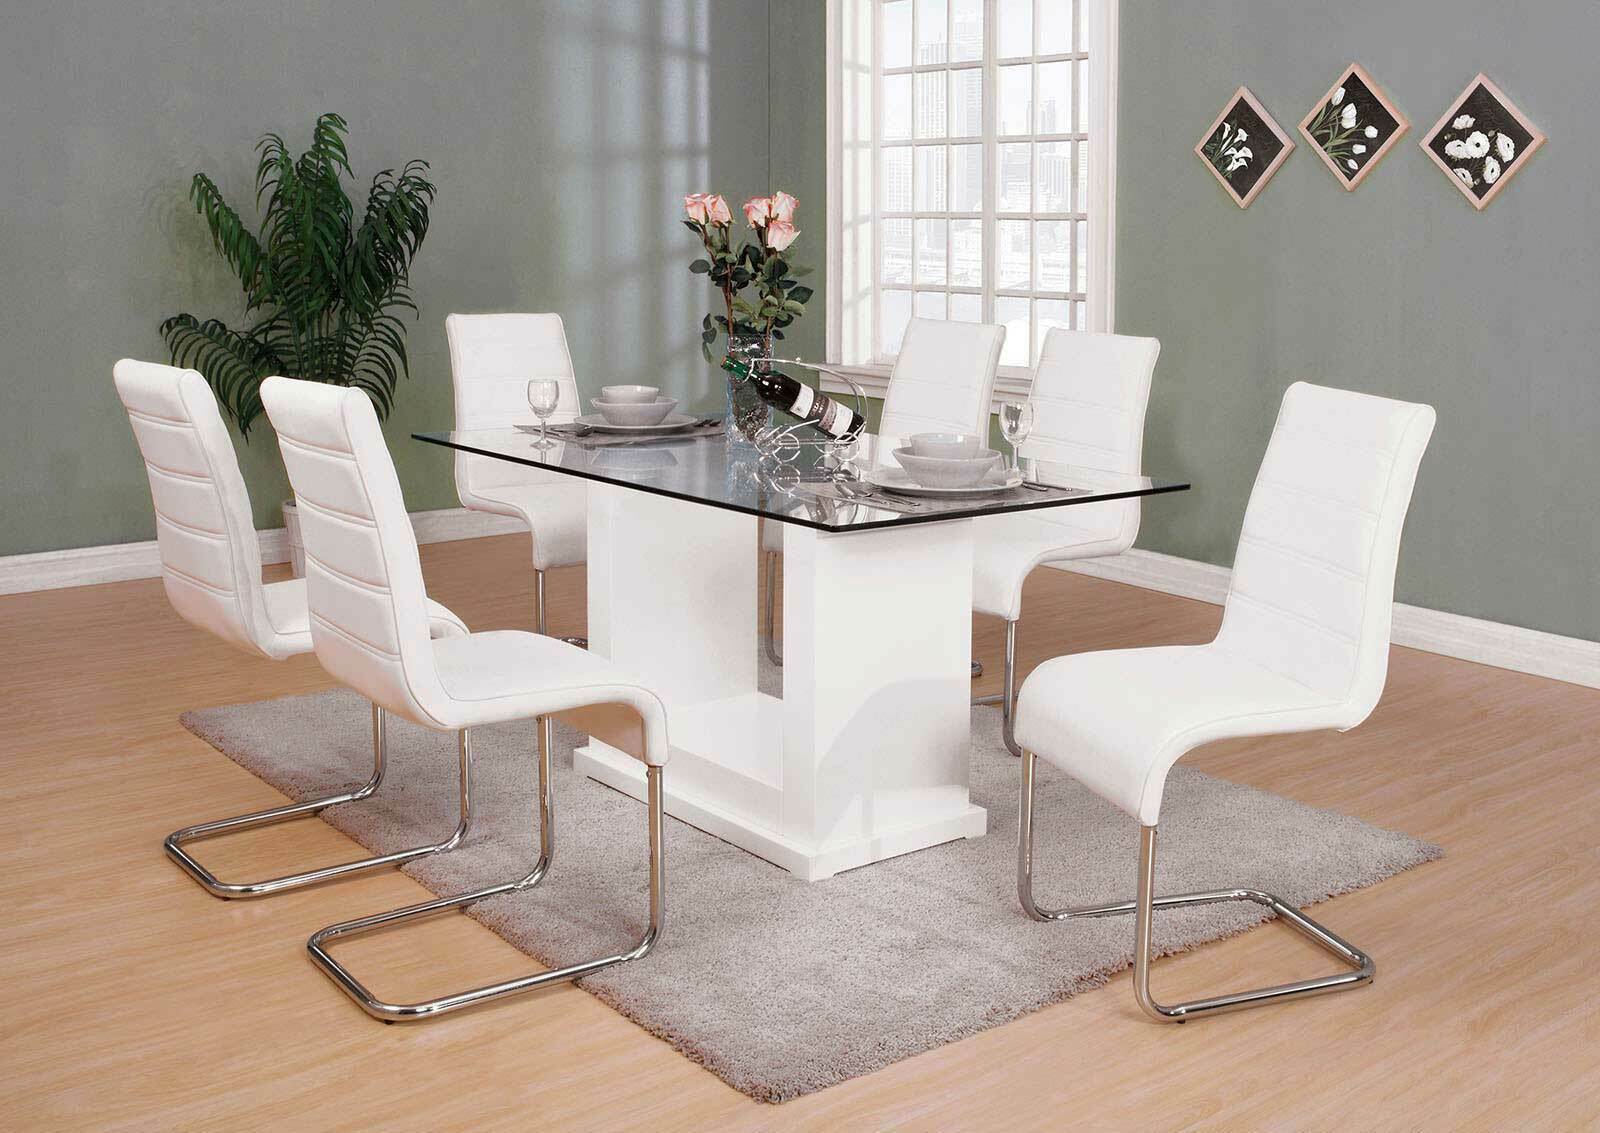 Inexpensive 7 Piece Dining Room Sets